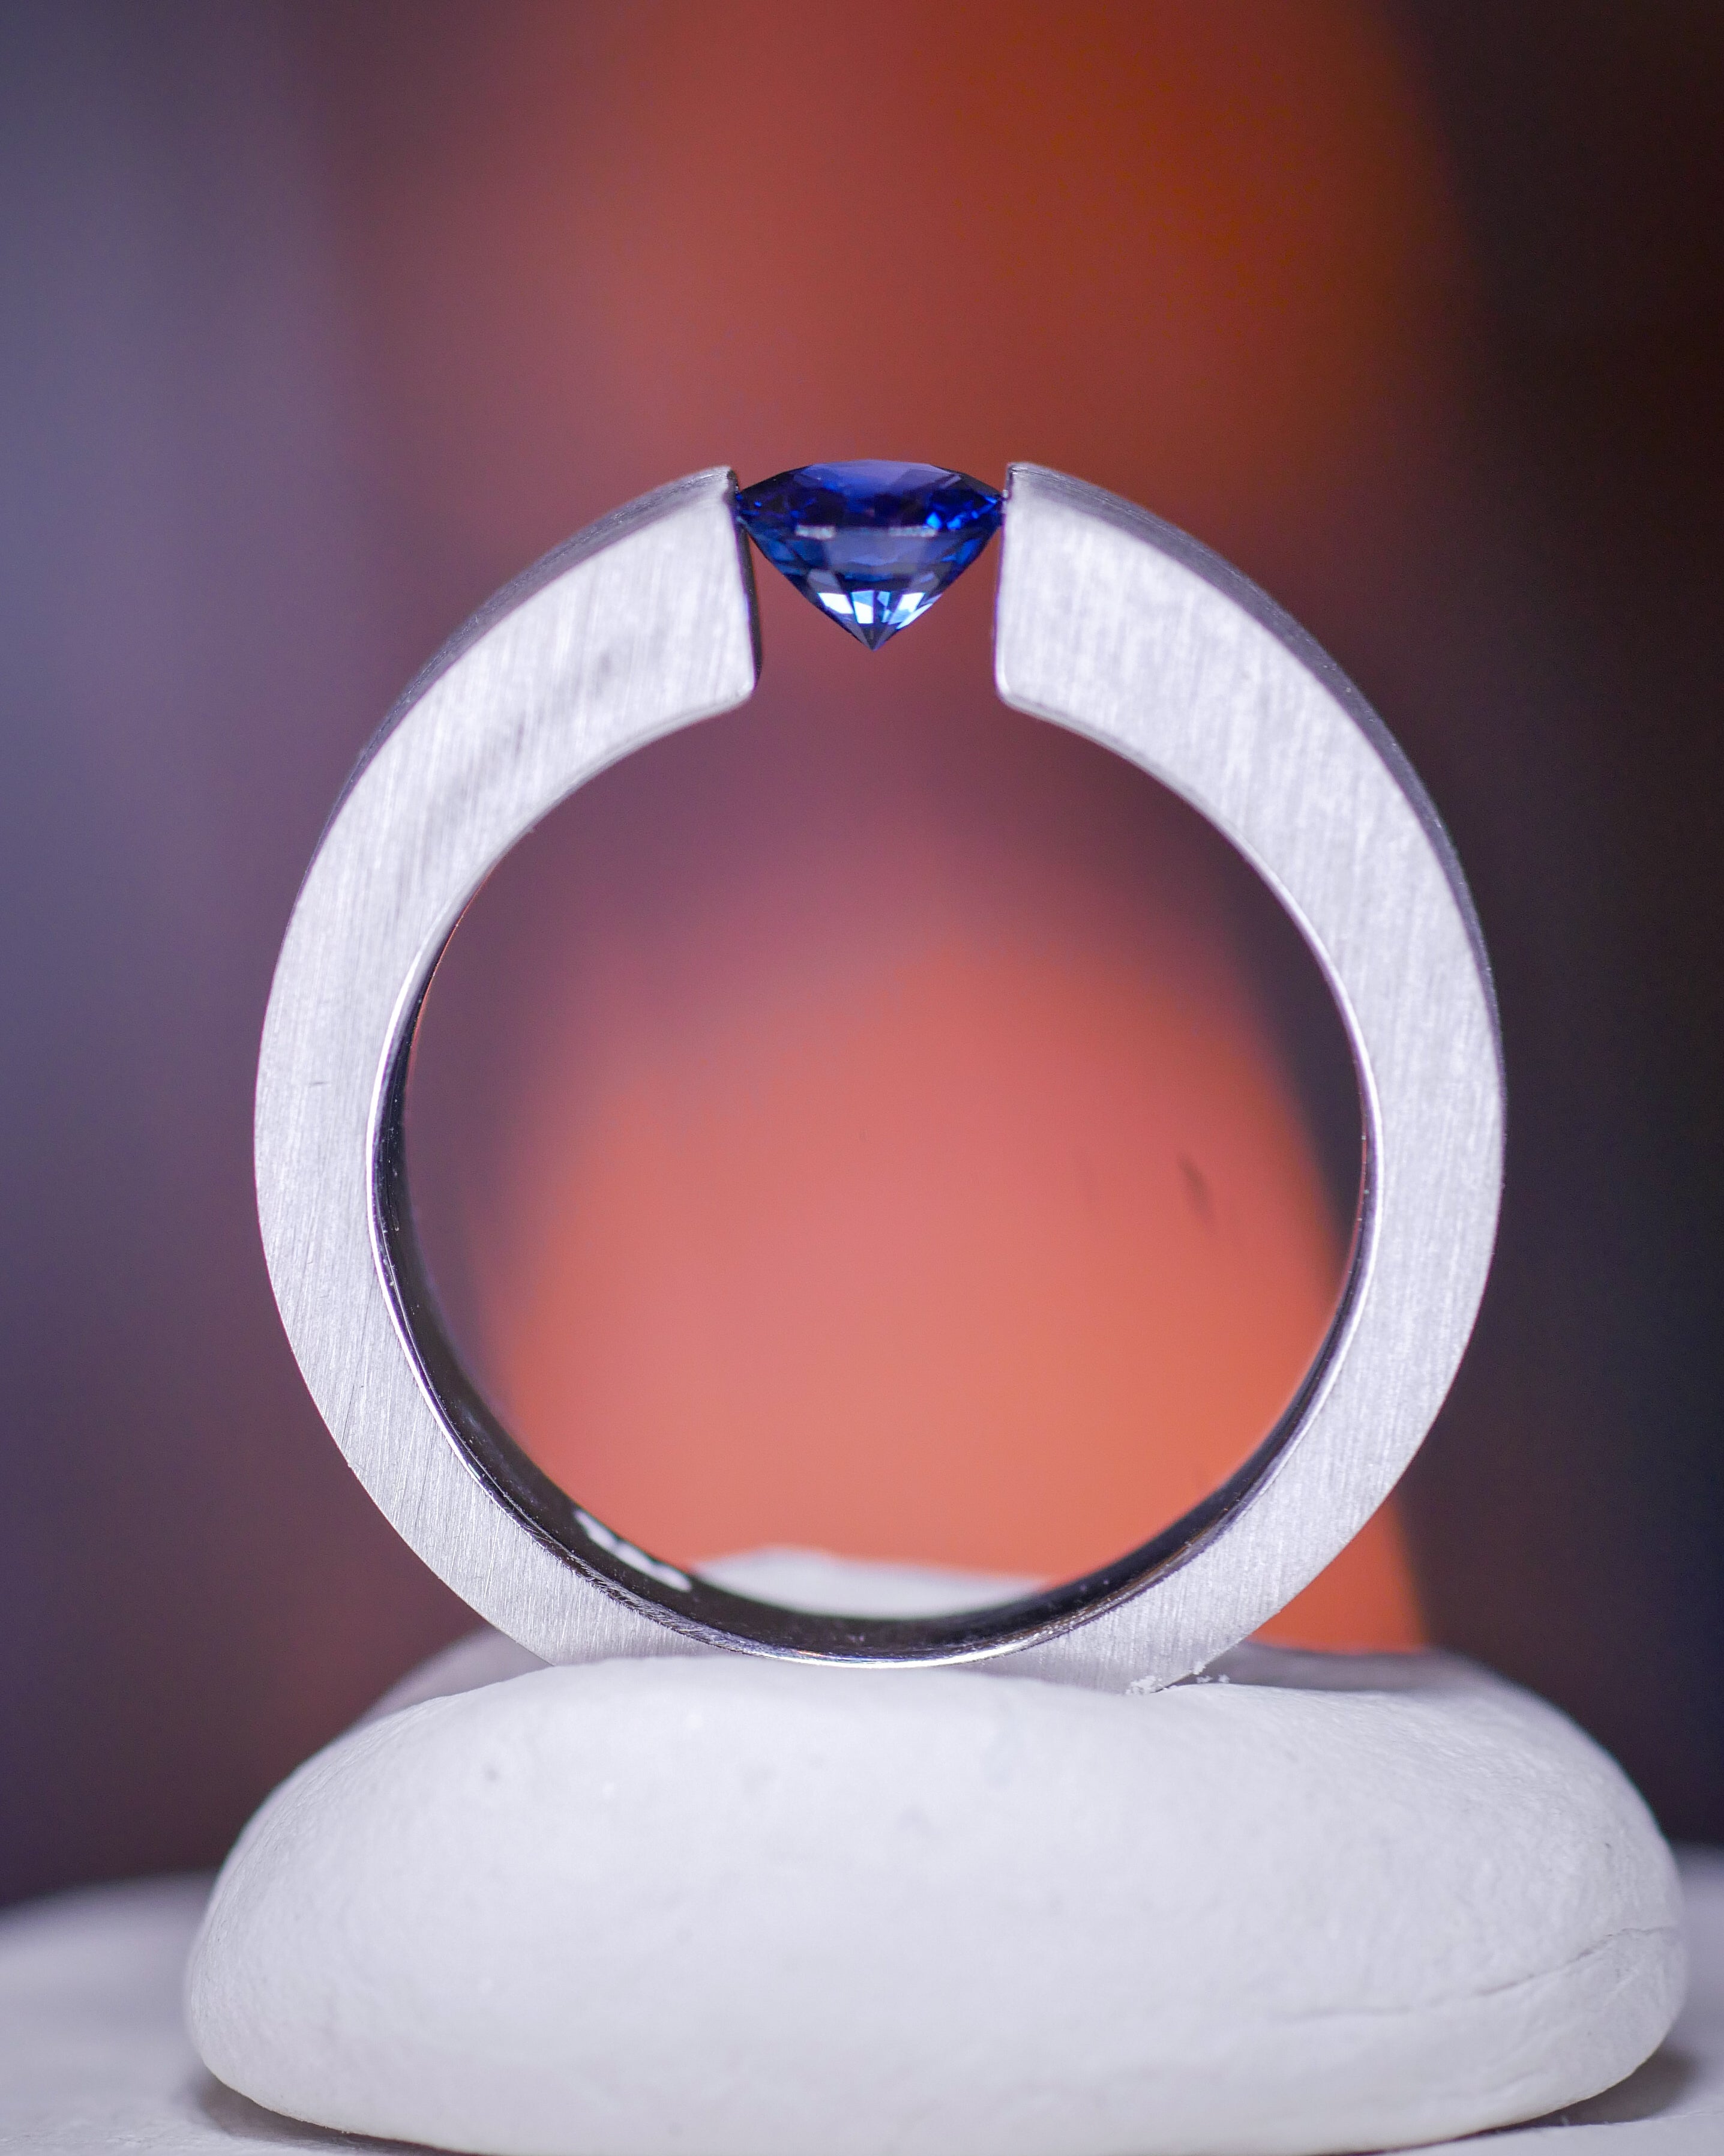 18K white gold tension ring style with a suspended blue sapphire – Clink  Clank Clunk